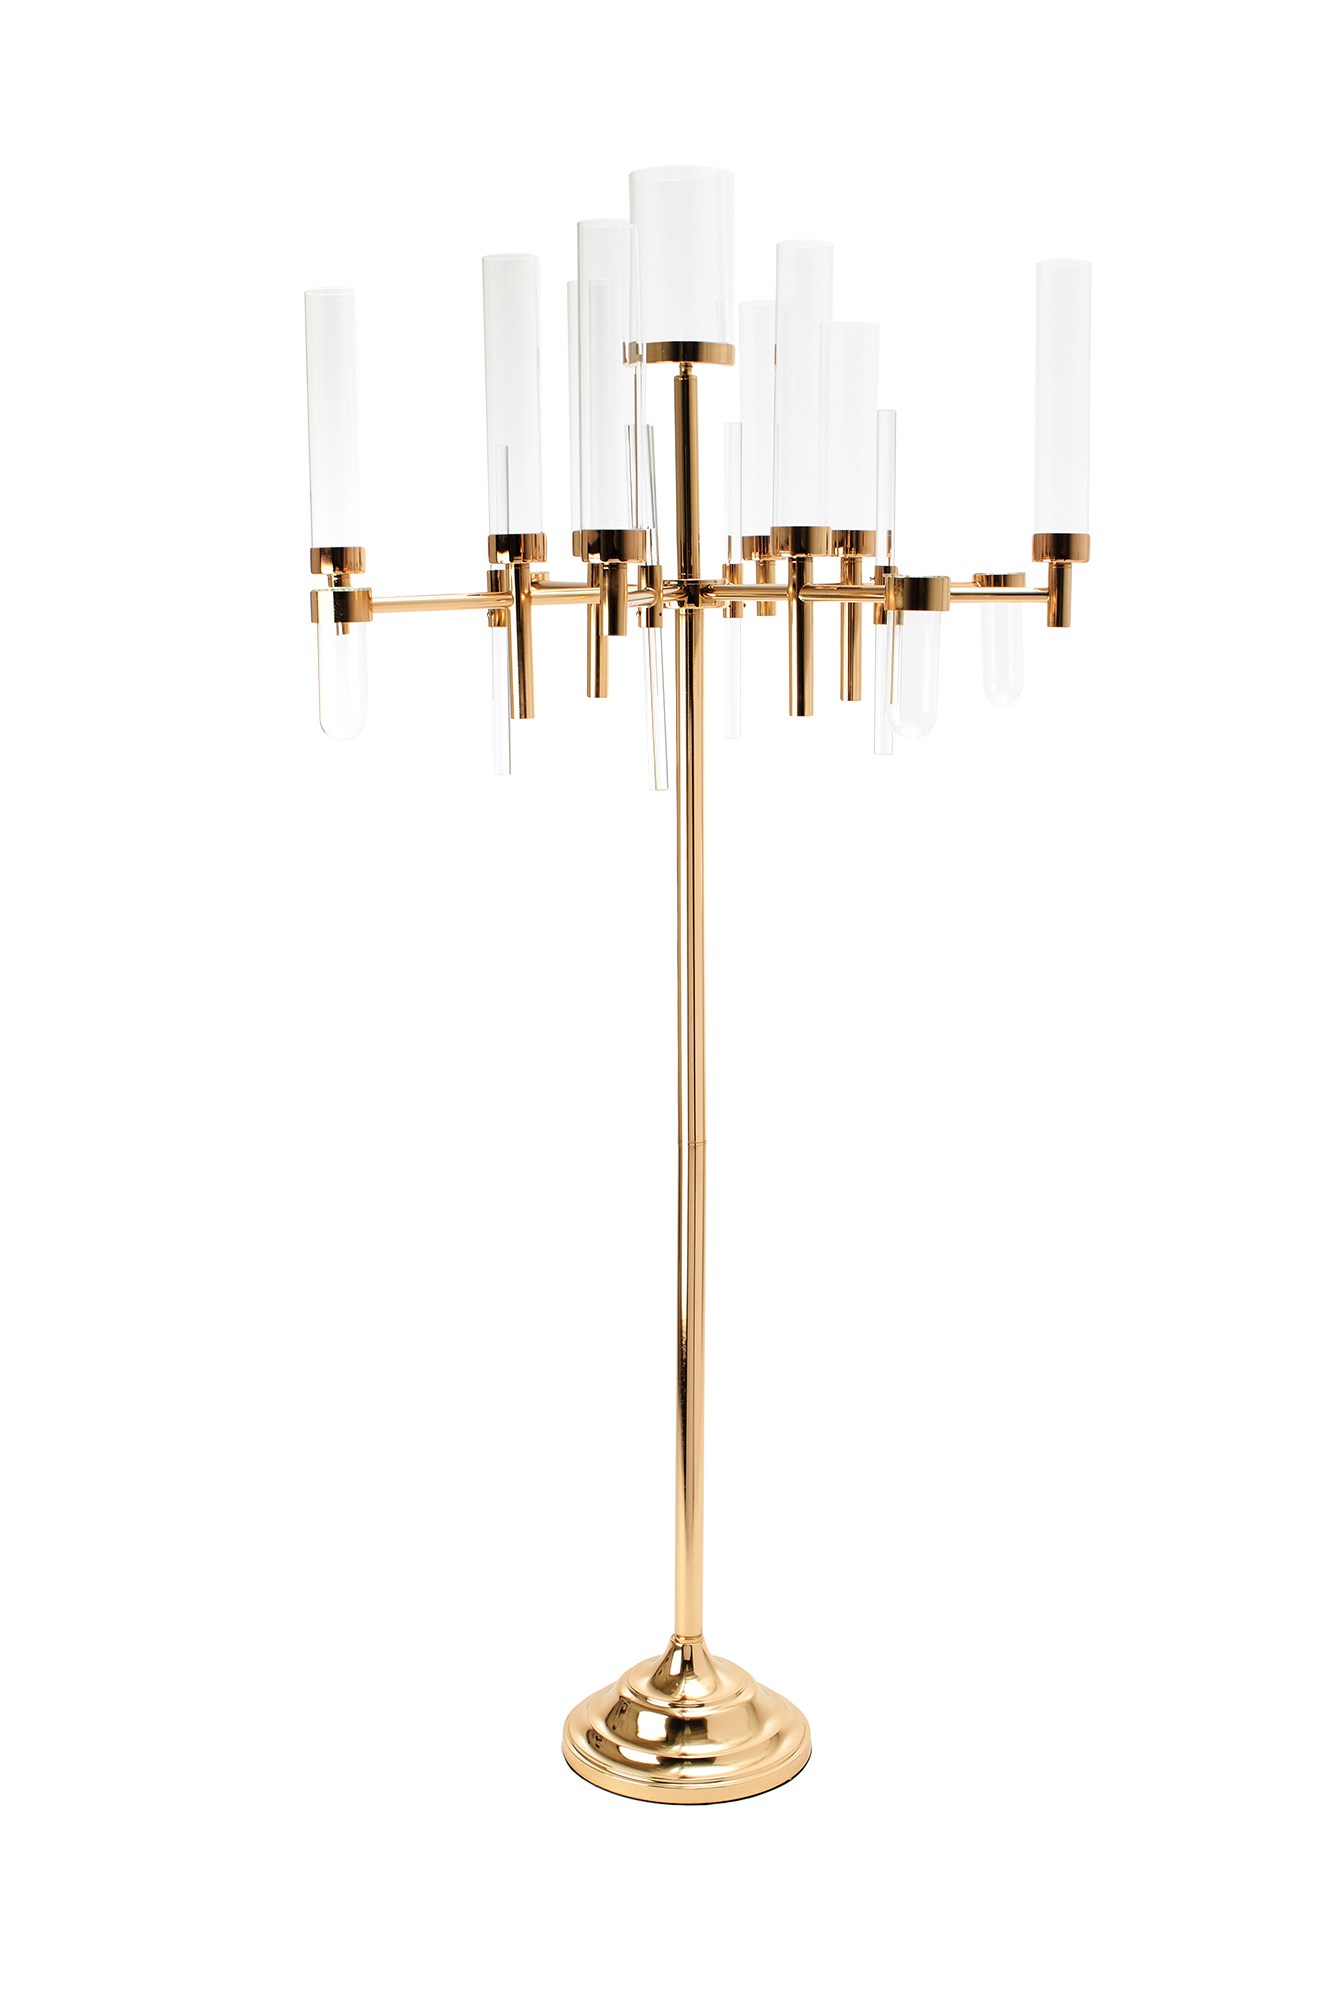 Candelabra 9 arm with Cylinder Shades 67¾" - Gold